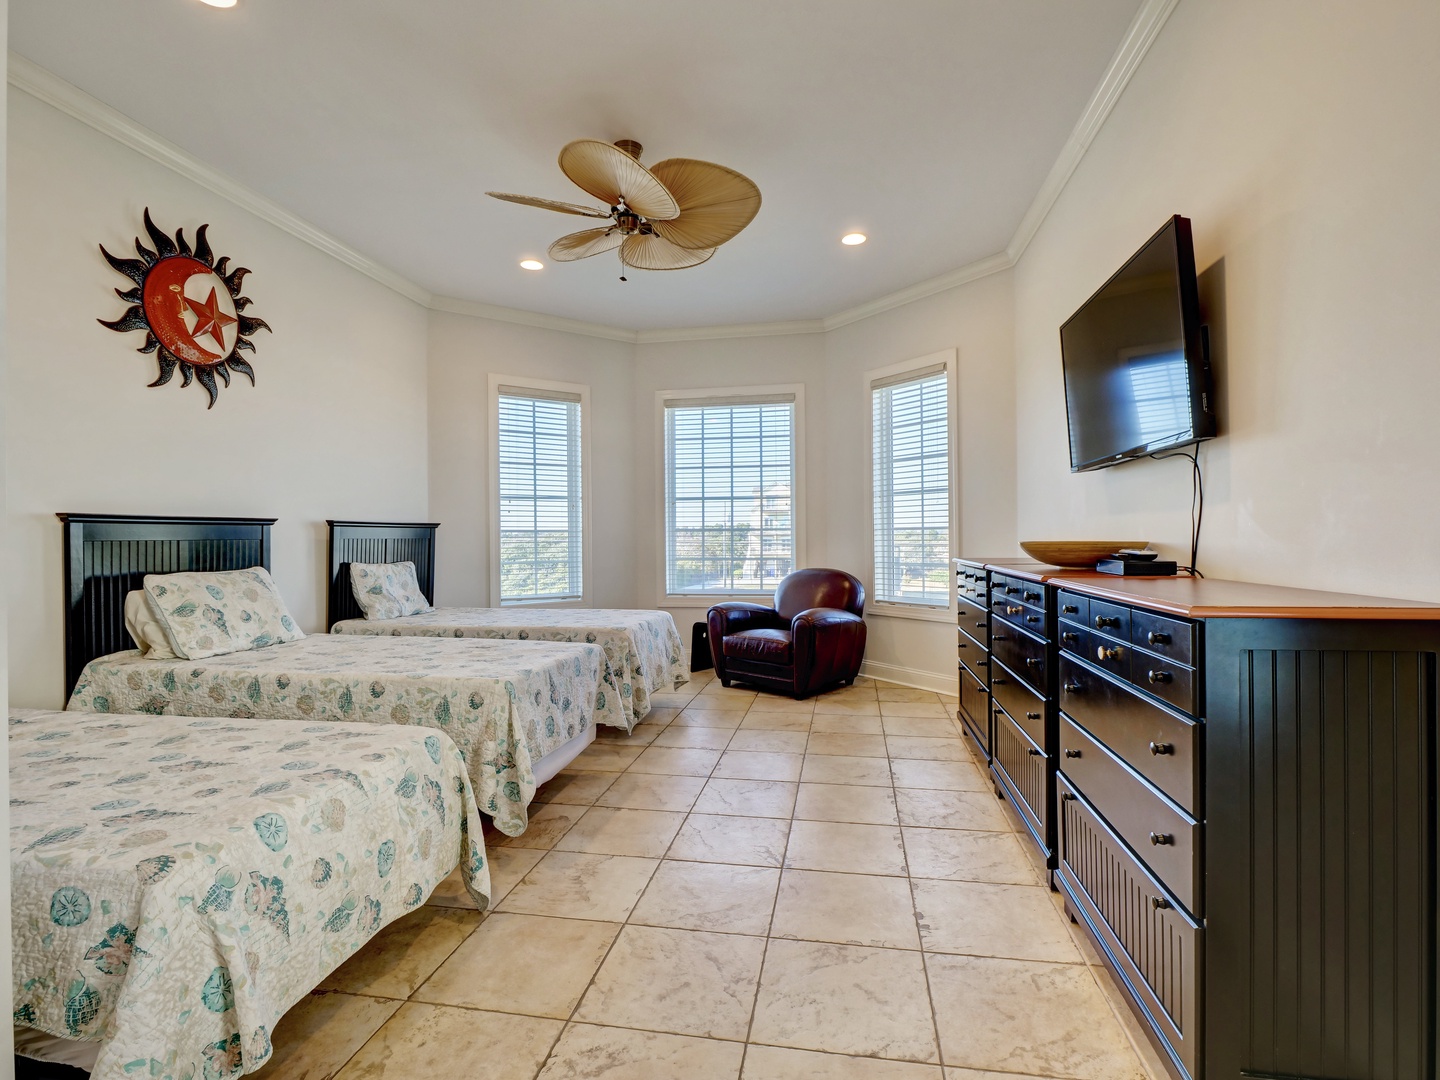 A guest bedroom with three twin-sized beds, a flat-screen TV, and a jack and jill bathroom